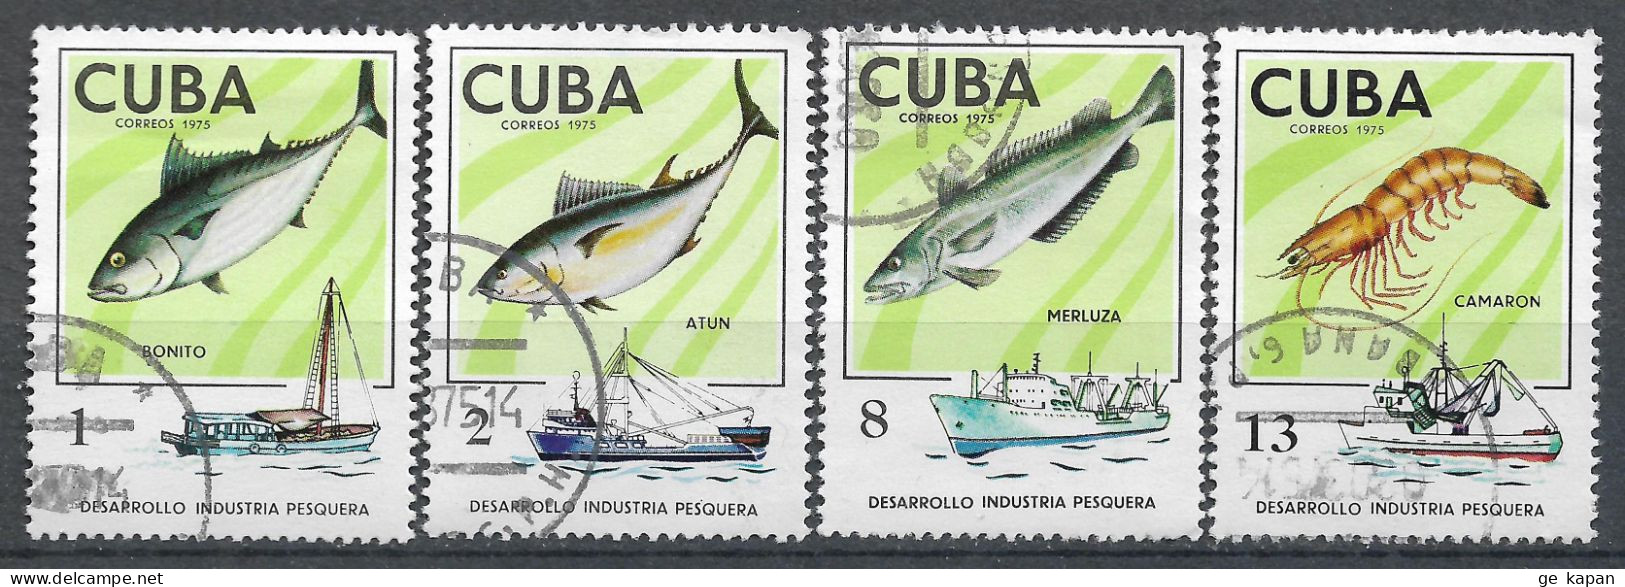 1975 CUBA Set Of 4 Used Stamps (Michel # 2030,2031,2033,2035) CV €1.80 - Used Stamps